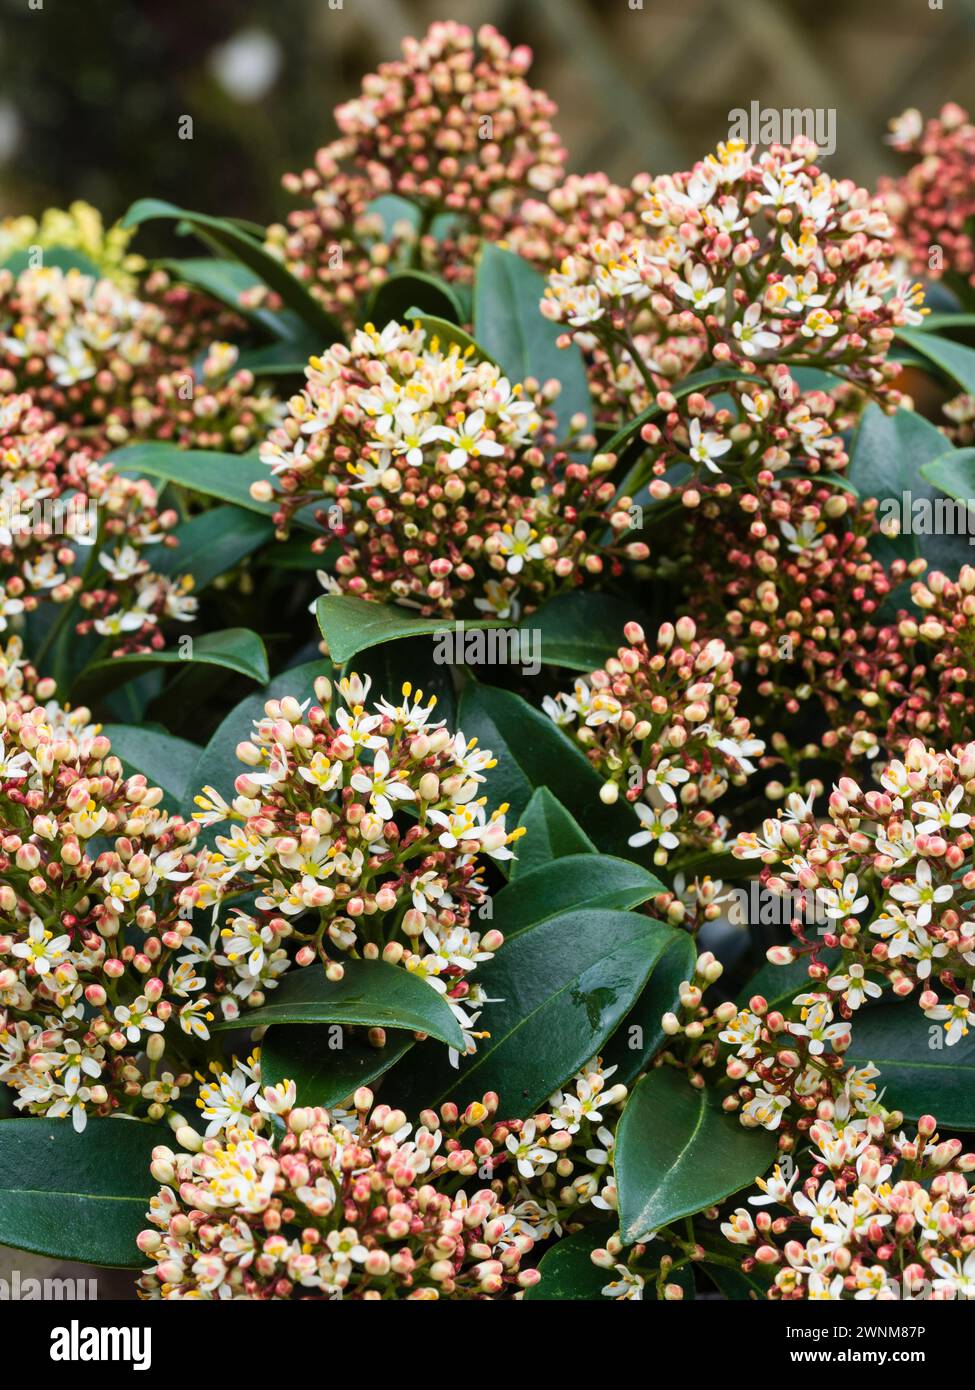 Scented male spring flowers in the panicles of the hardy evergreen shrub, Skimmia japonica 'Marlot' Stock Photo